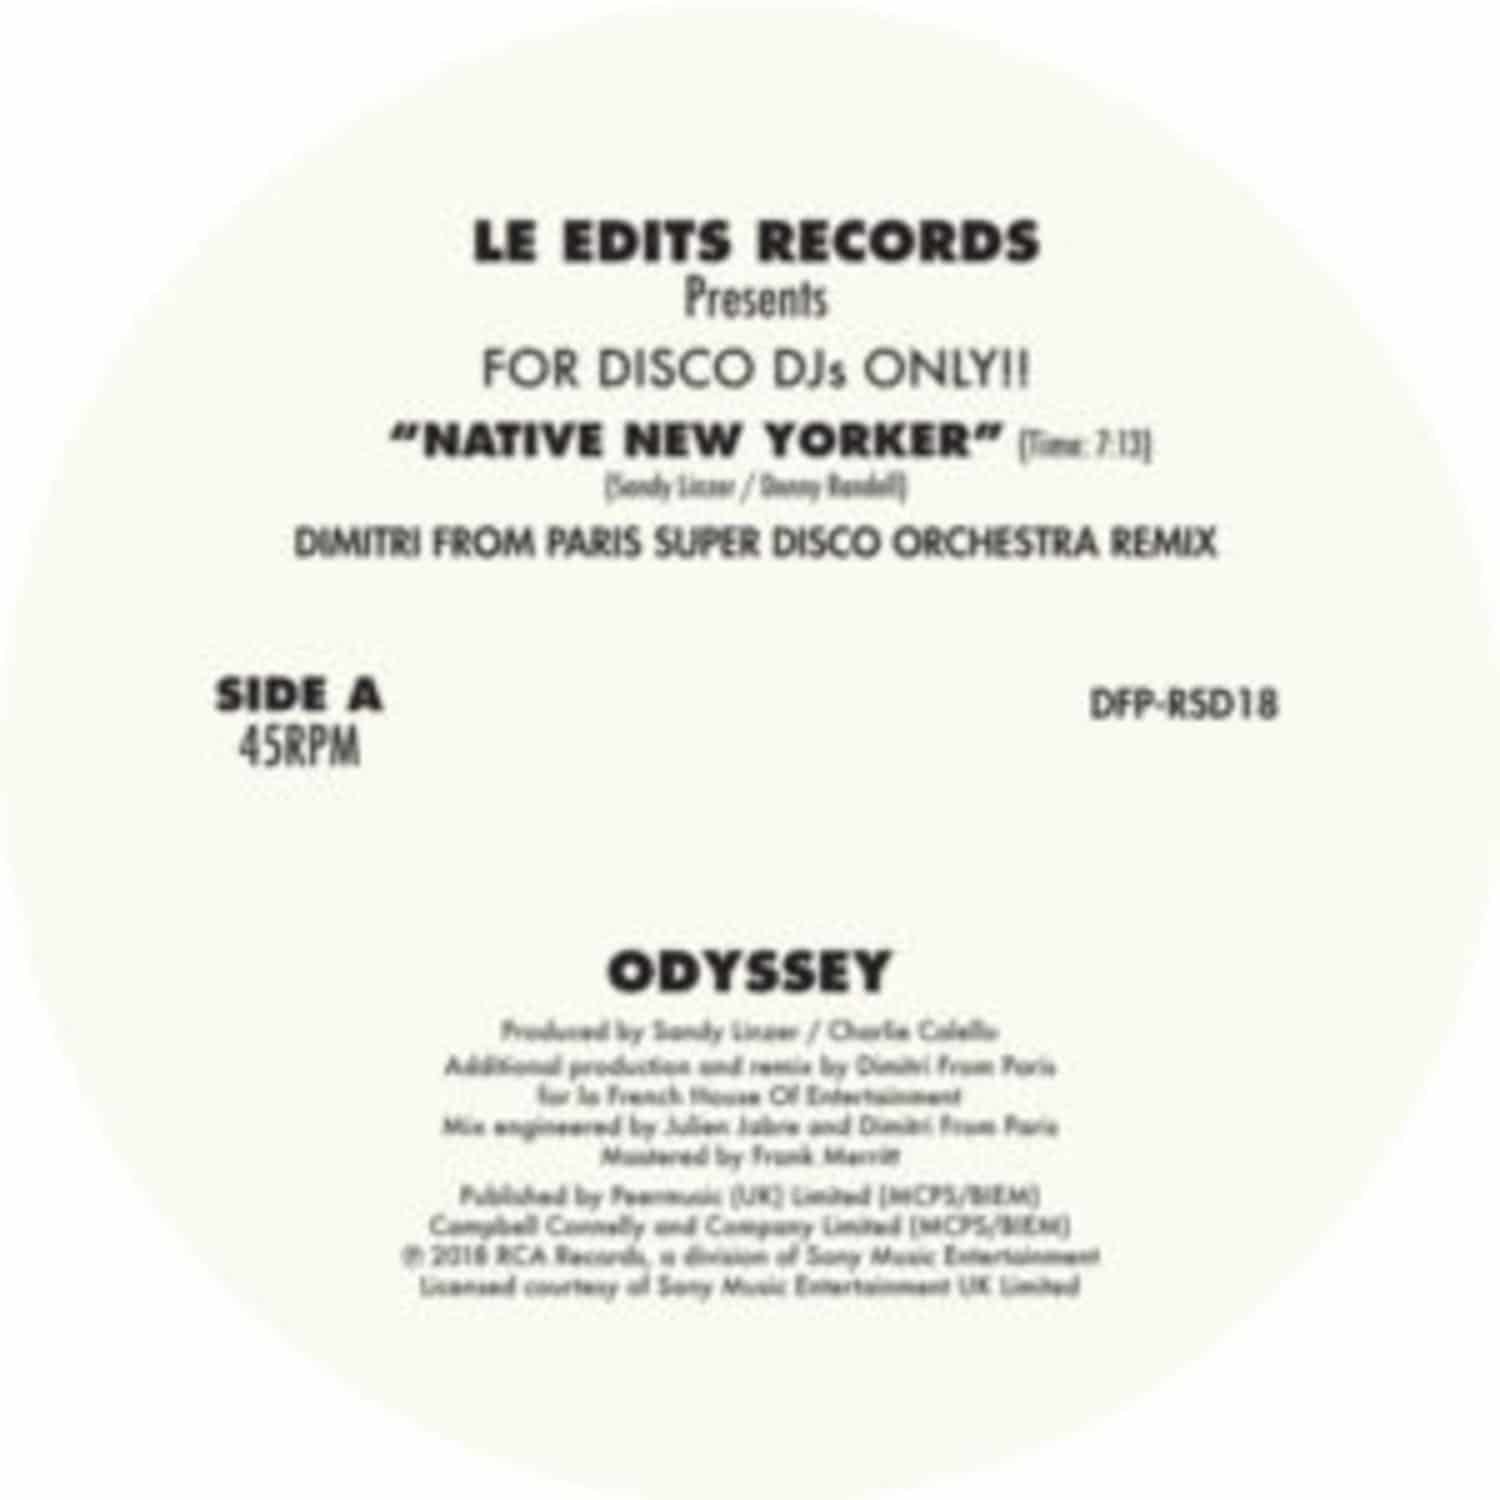 Odyssey / Phyllis Hyman / Keni Burke - RSD 2018*** NATIVE NEW YORKER / YOU KNOW HOW TO LOVE ME / LET SOMEBODY LOVE YOU 